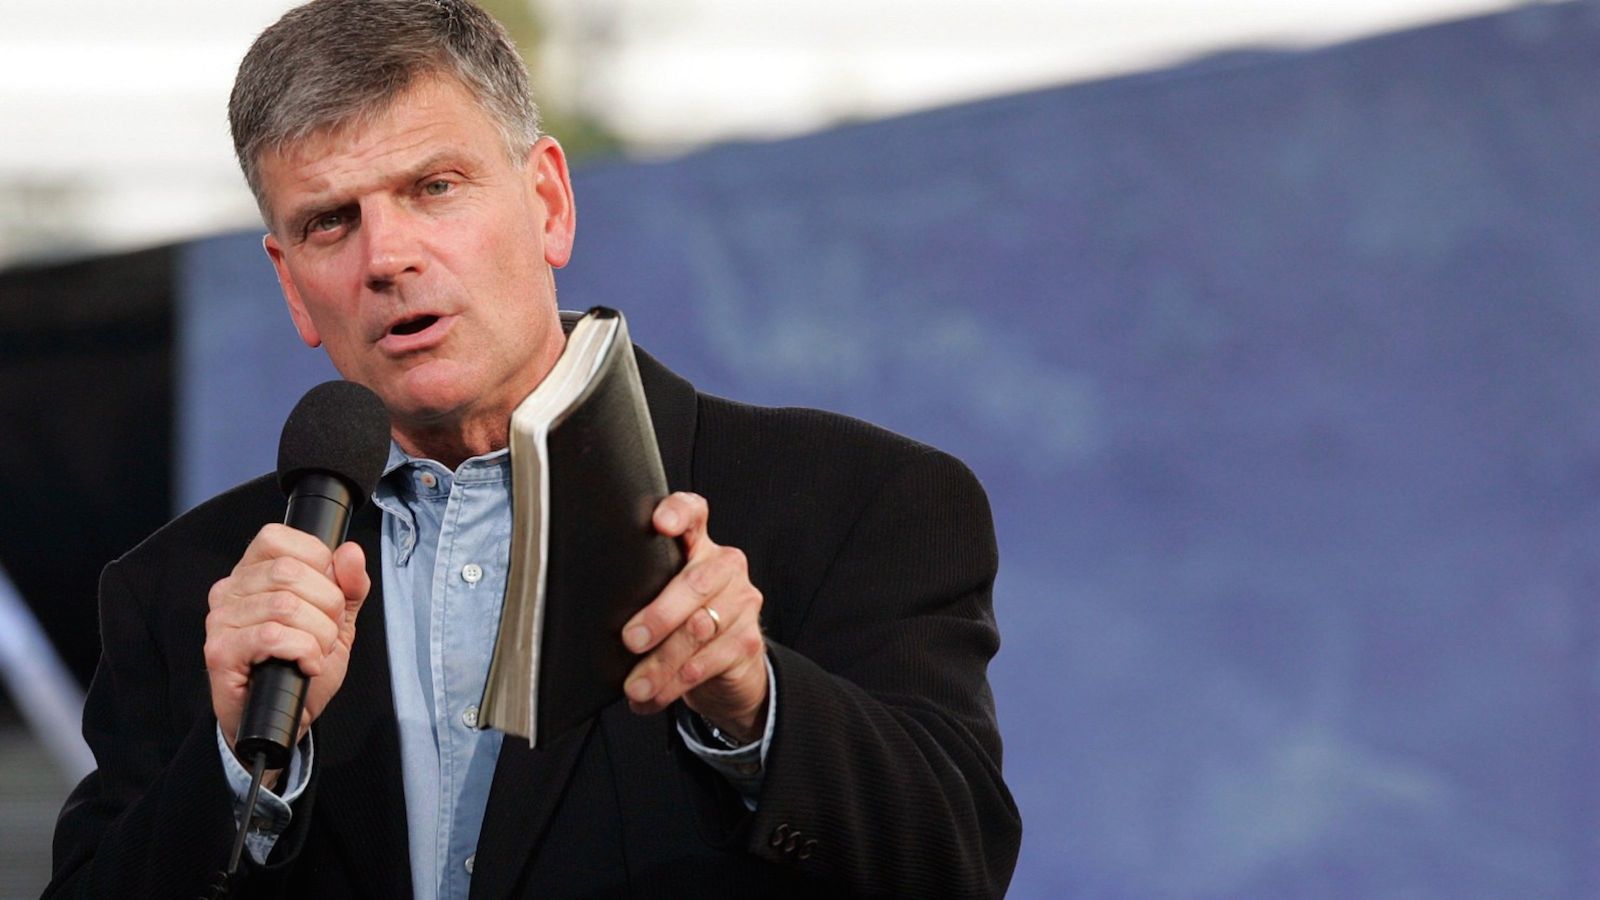 Prominent evangelist the Rev. Franklin Graham has warned that if the United States does not return to God, it soon may face its demise - just the Babylonian empire did nearly 2,500 years ago.